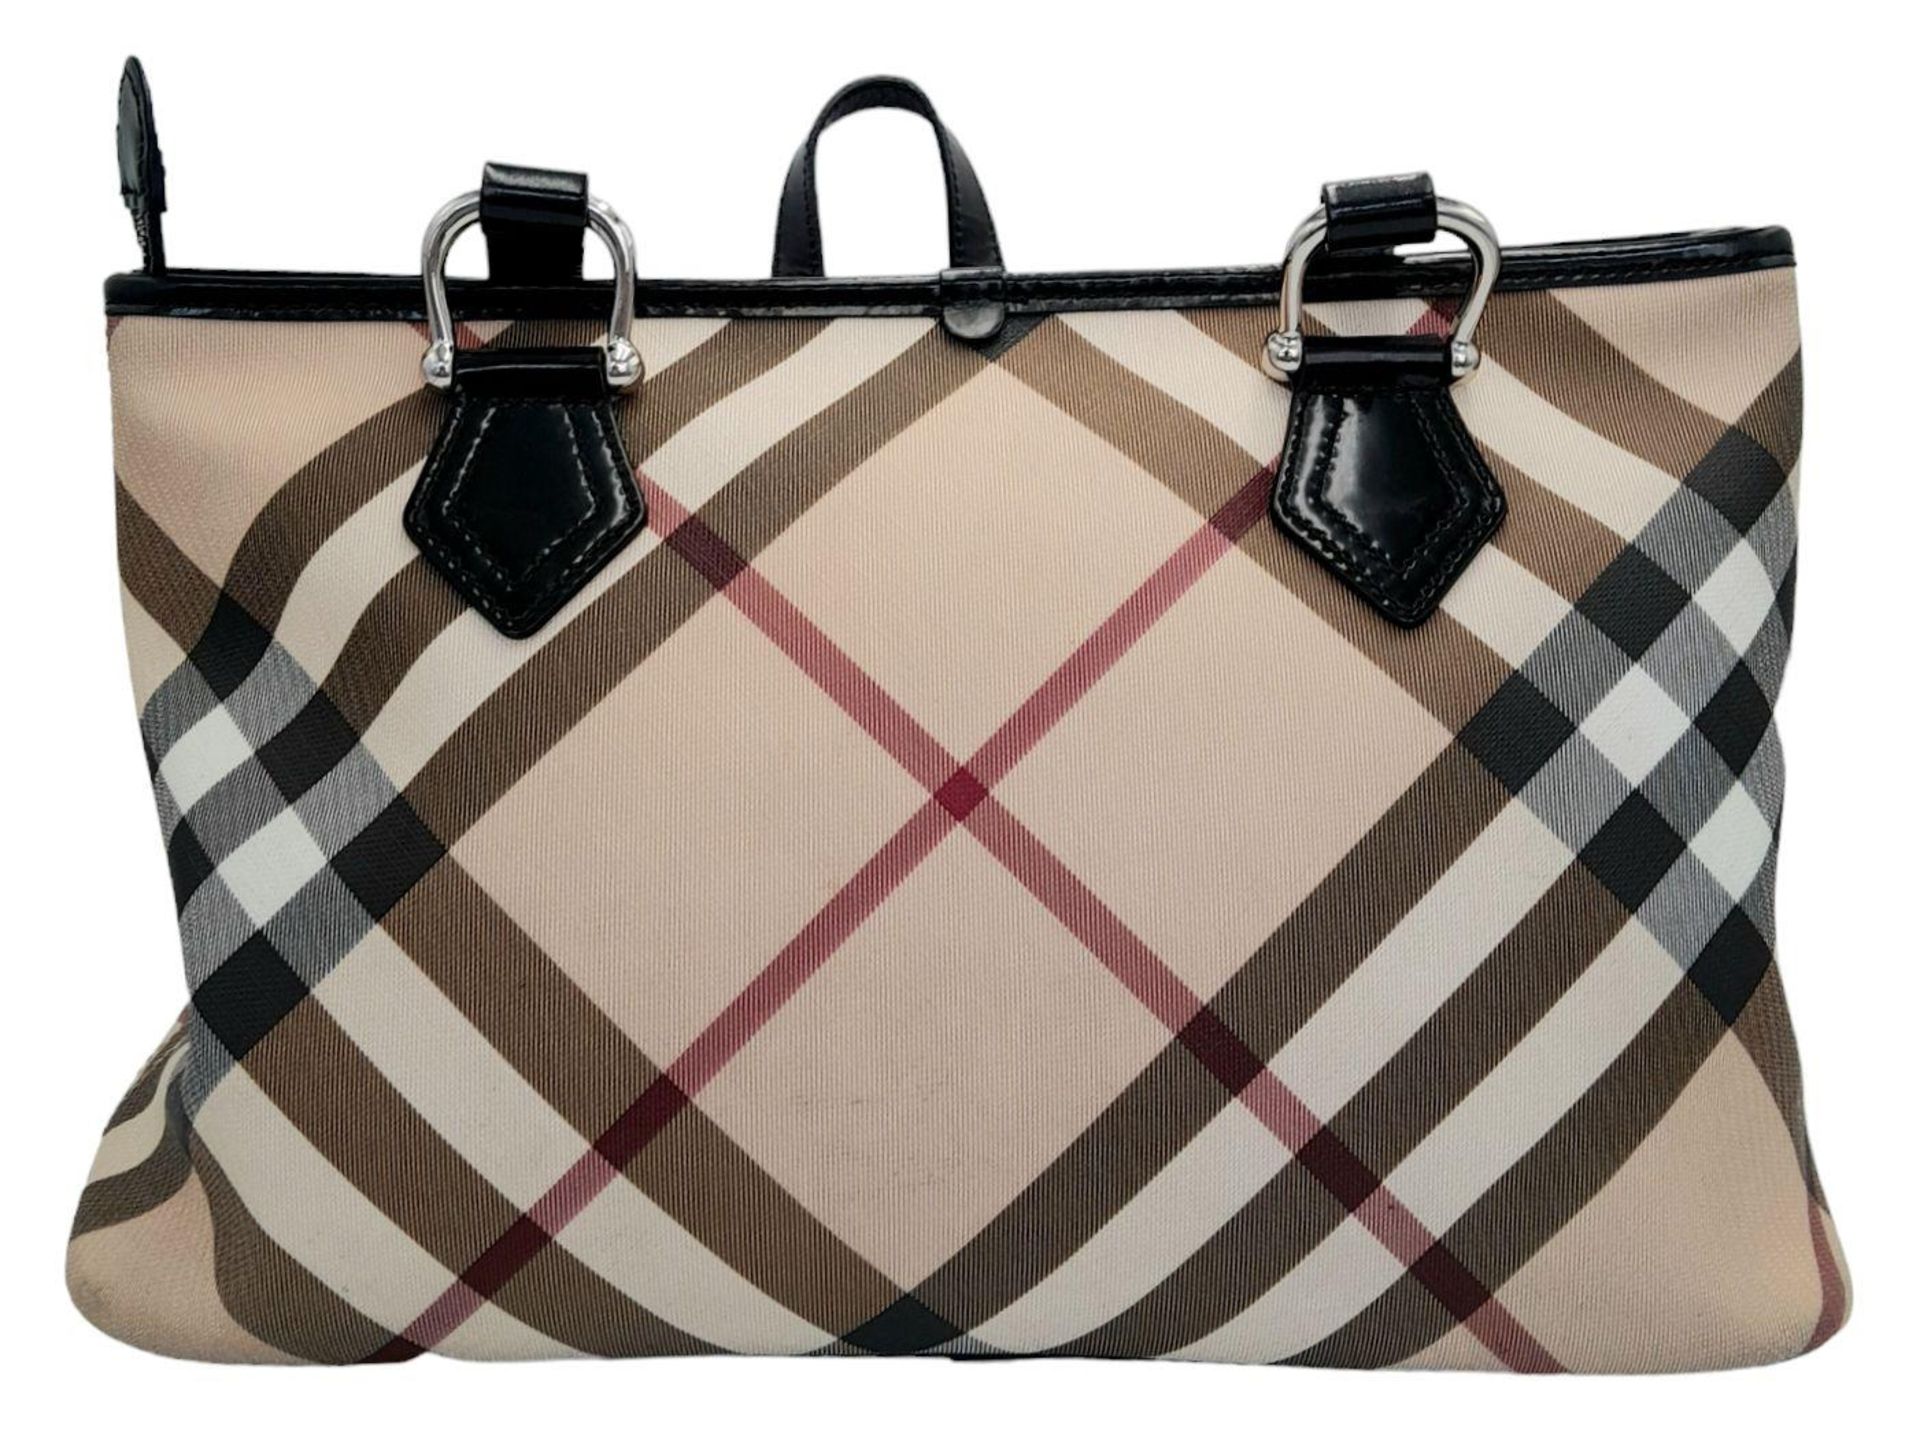 A Burberry Beige Check Nova Bag. Coated canvas exterior with leather trim, two leather straps, - Image 2 of 13